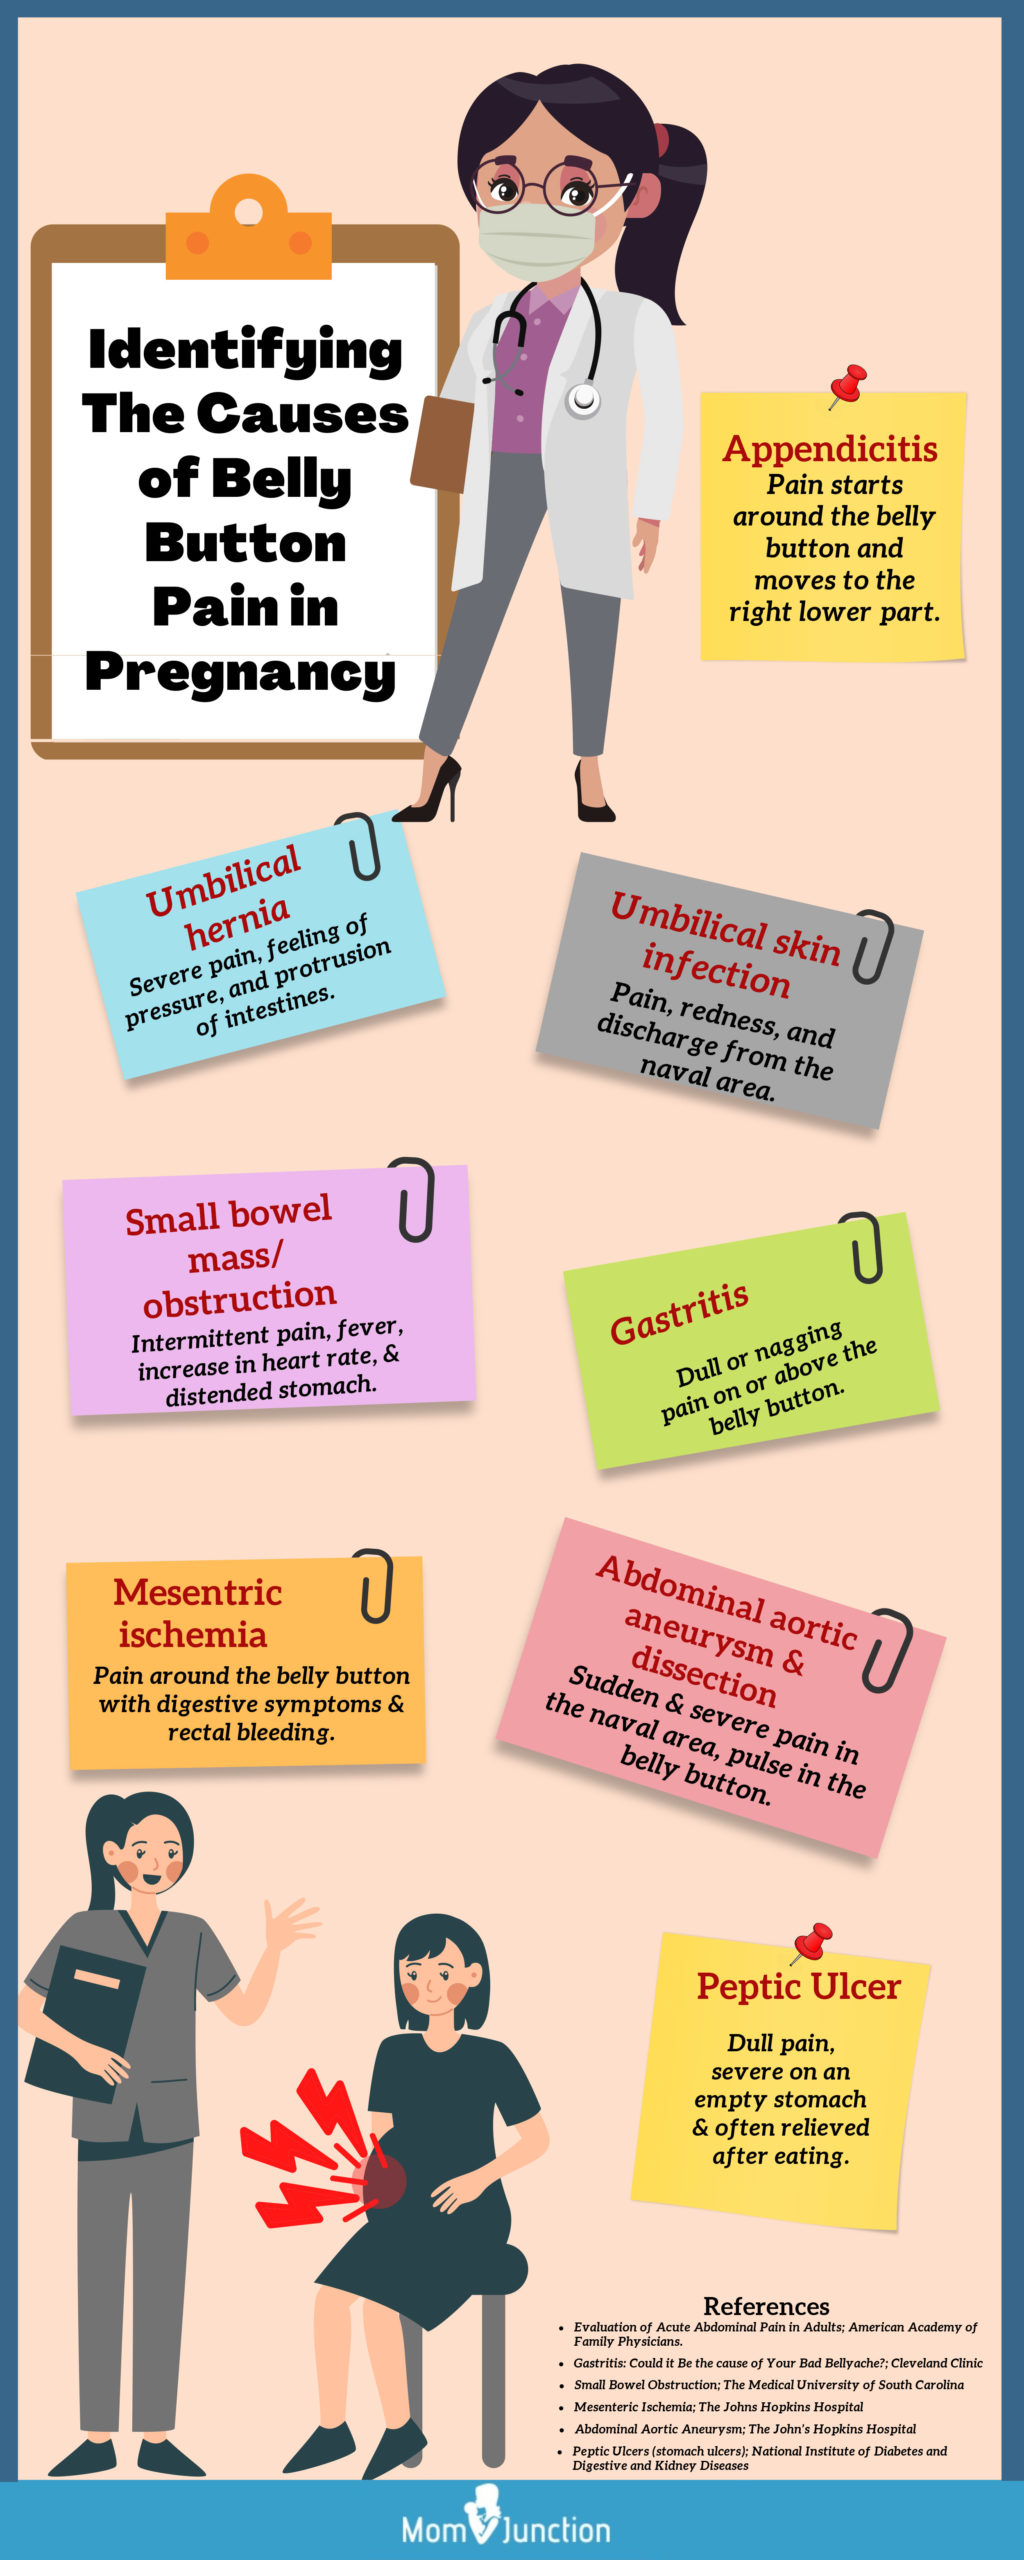 identifying the causes of belly button pain in pregnancy (infographic)